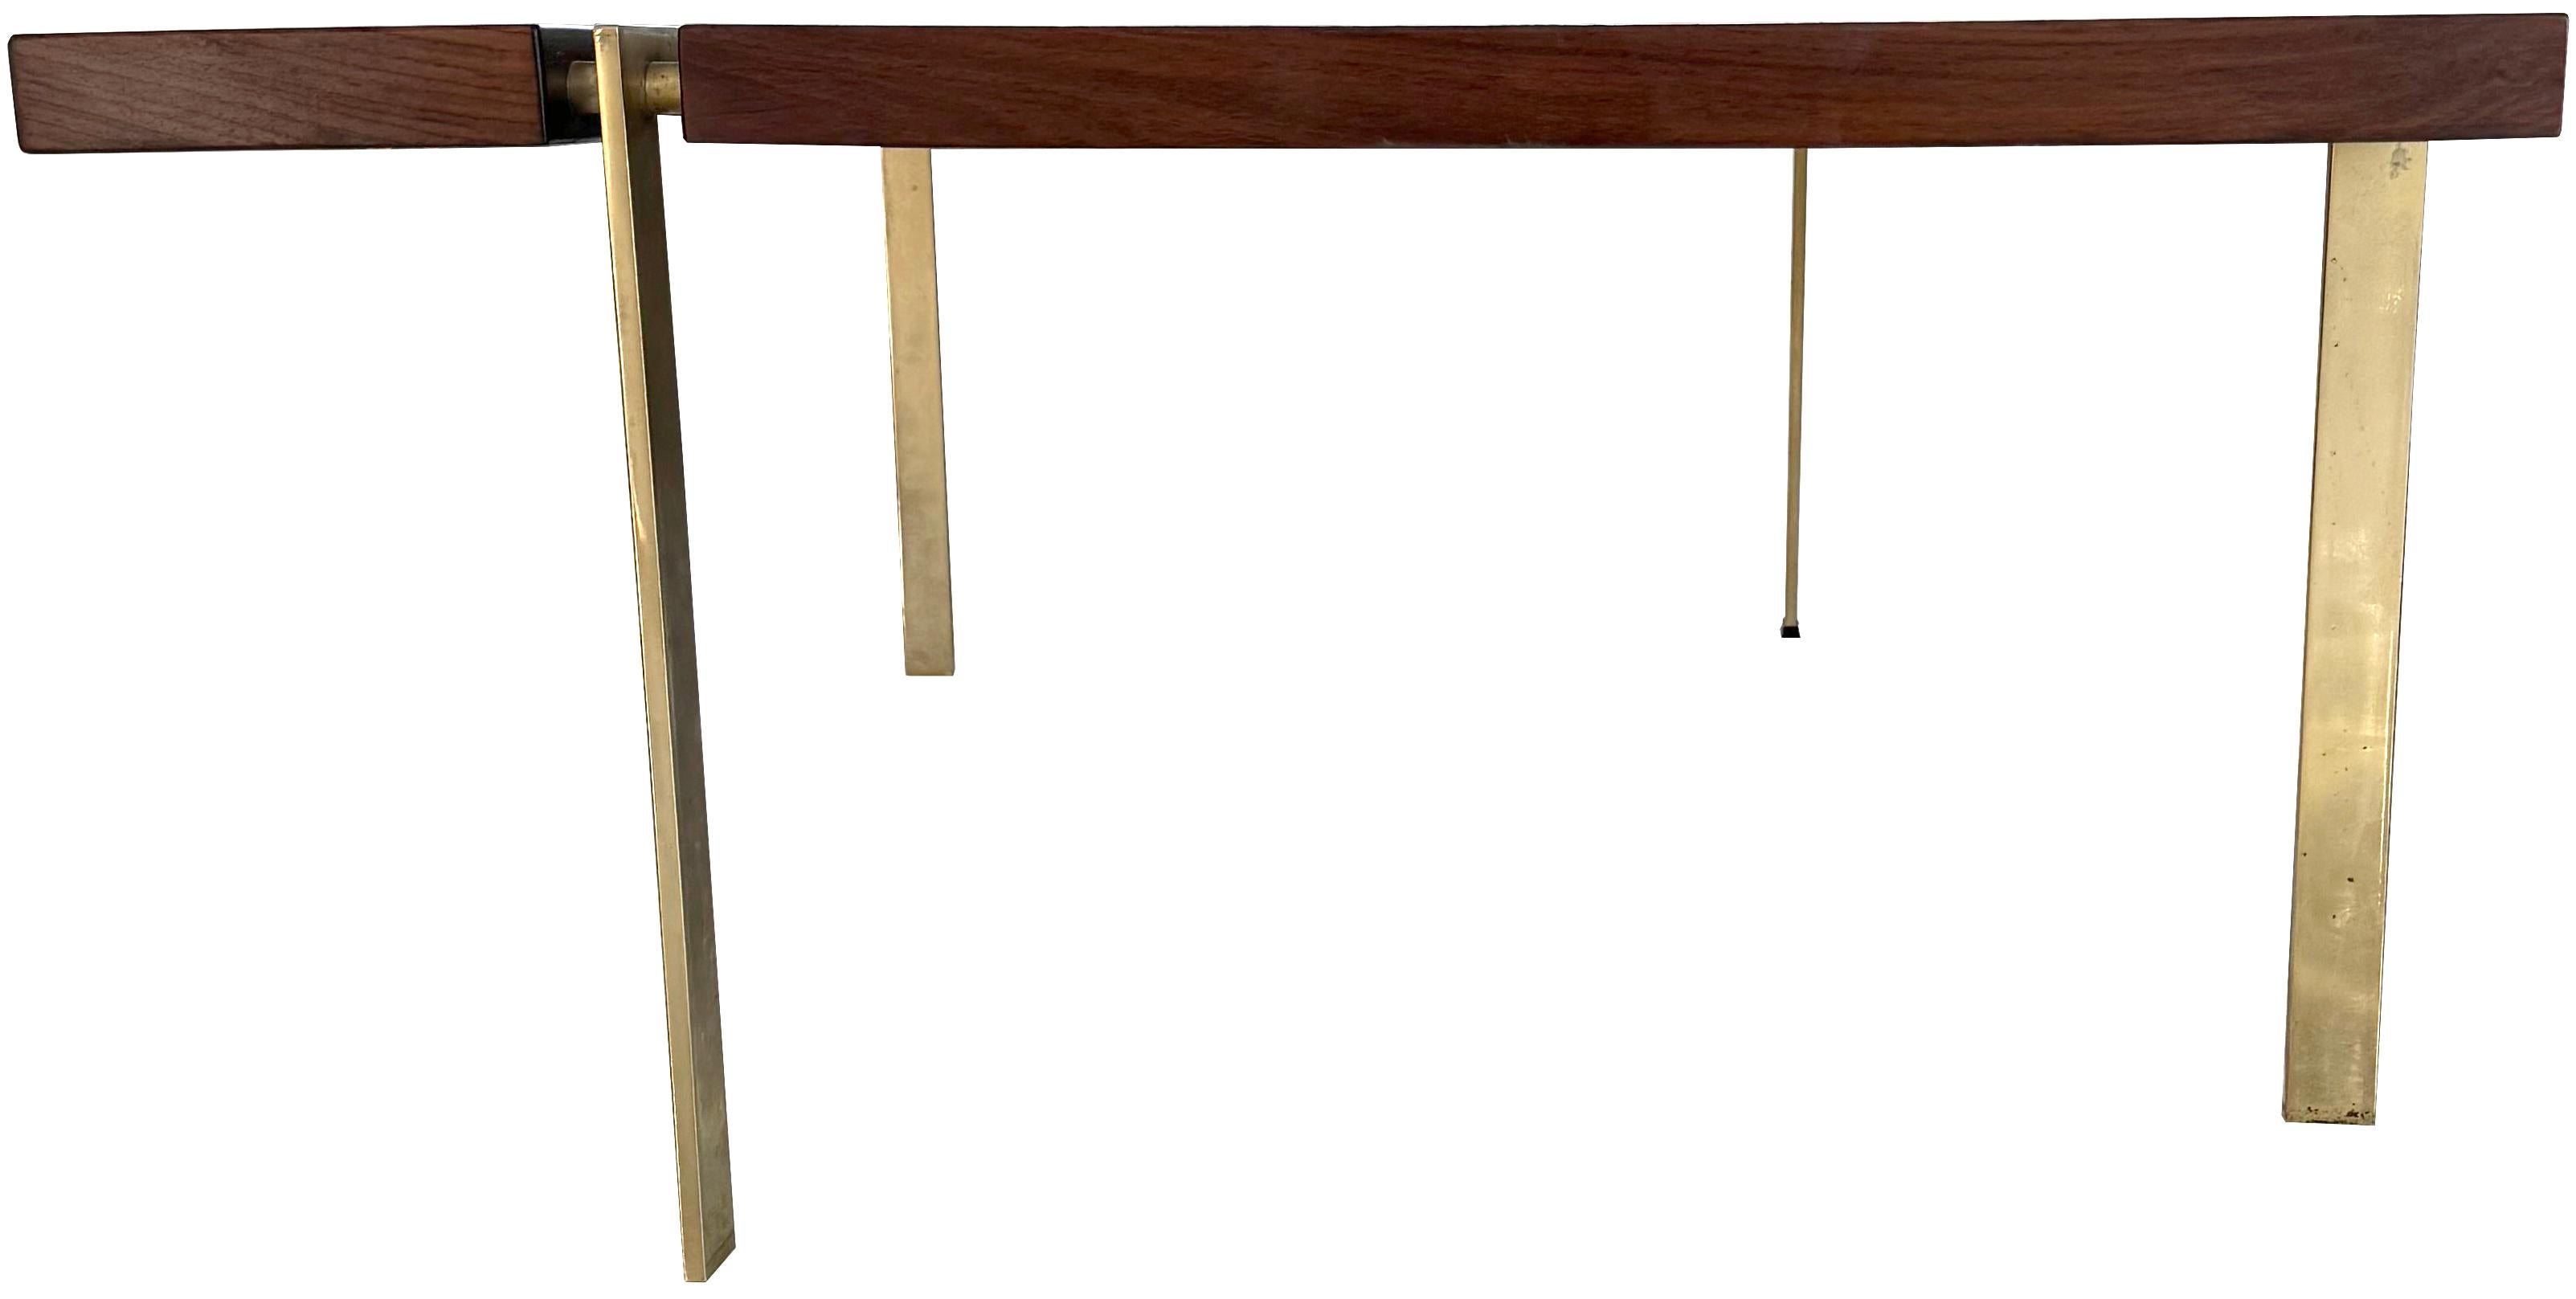 Scandinavian Modern Svend Aage Jessen Tile Top Coffee Table in Rosewood and Brass For Sale